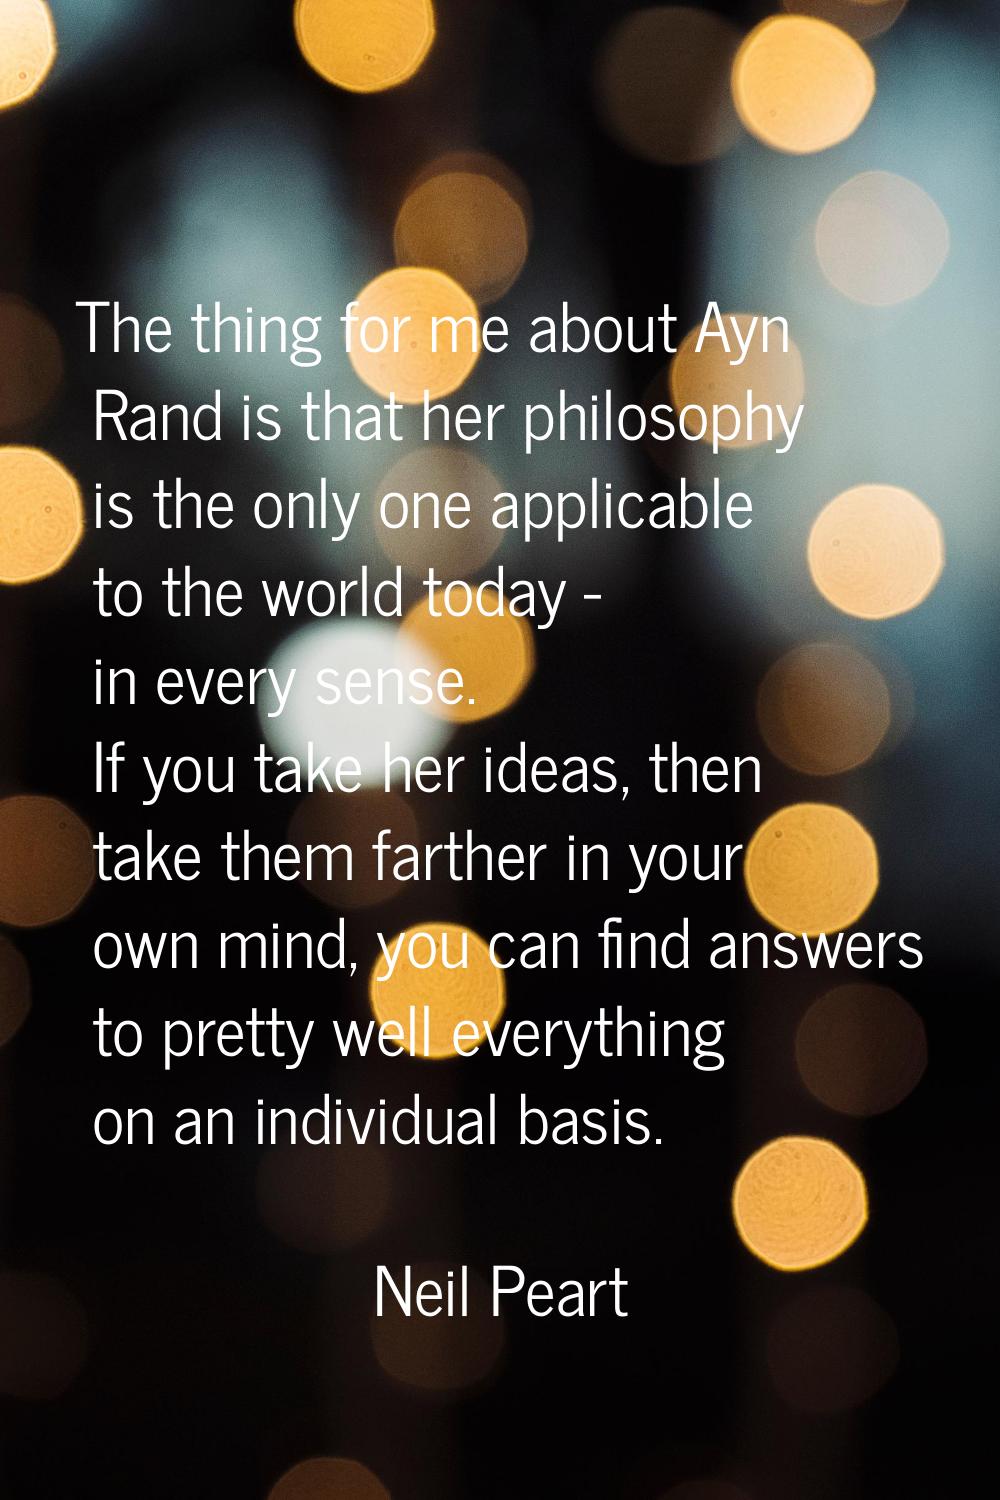 The thing for me about Ayn Rand is that her philosophy is the only one applicable to the world toda